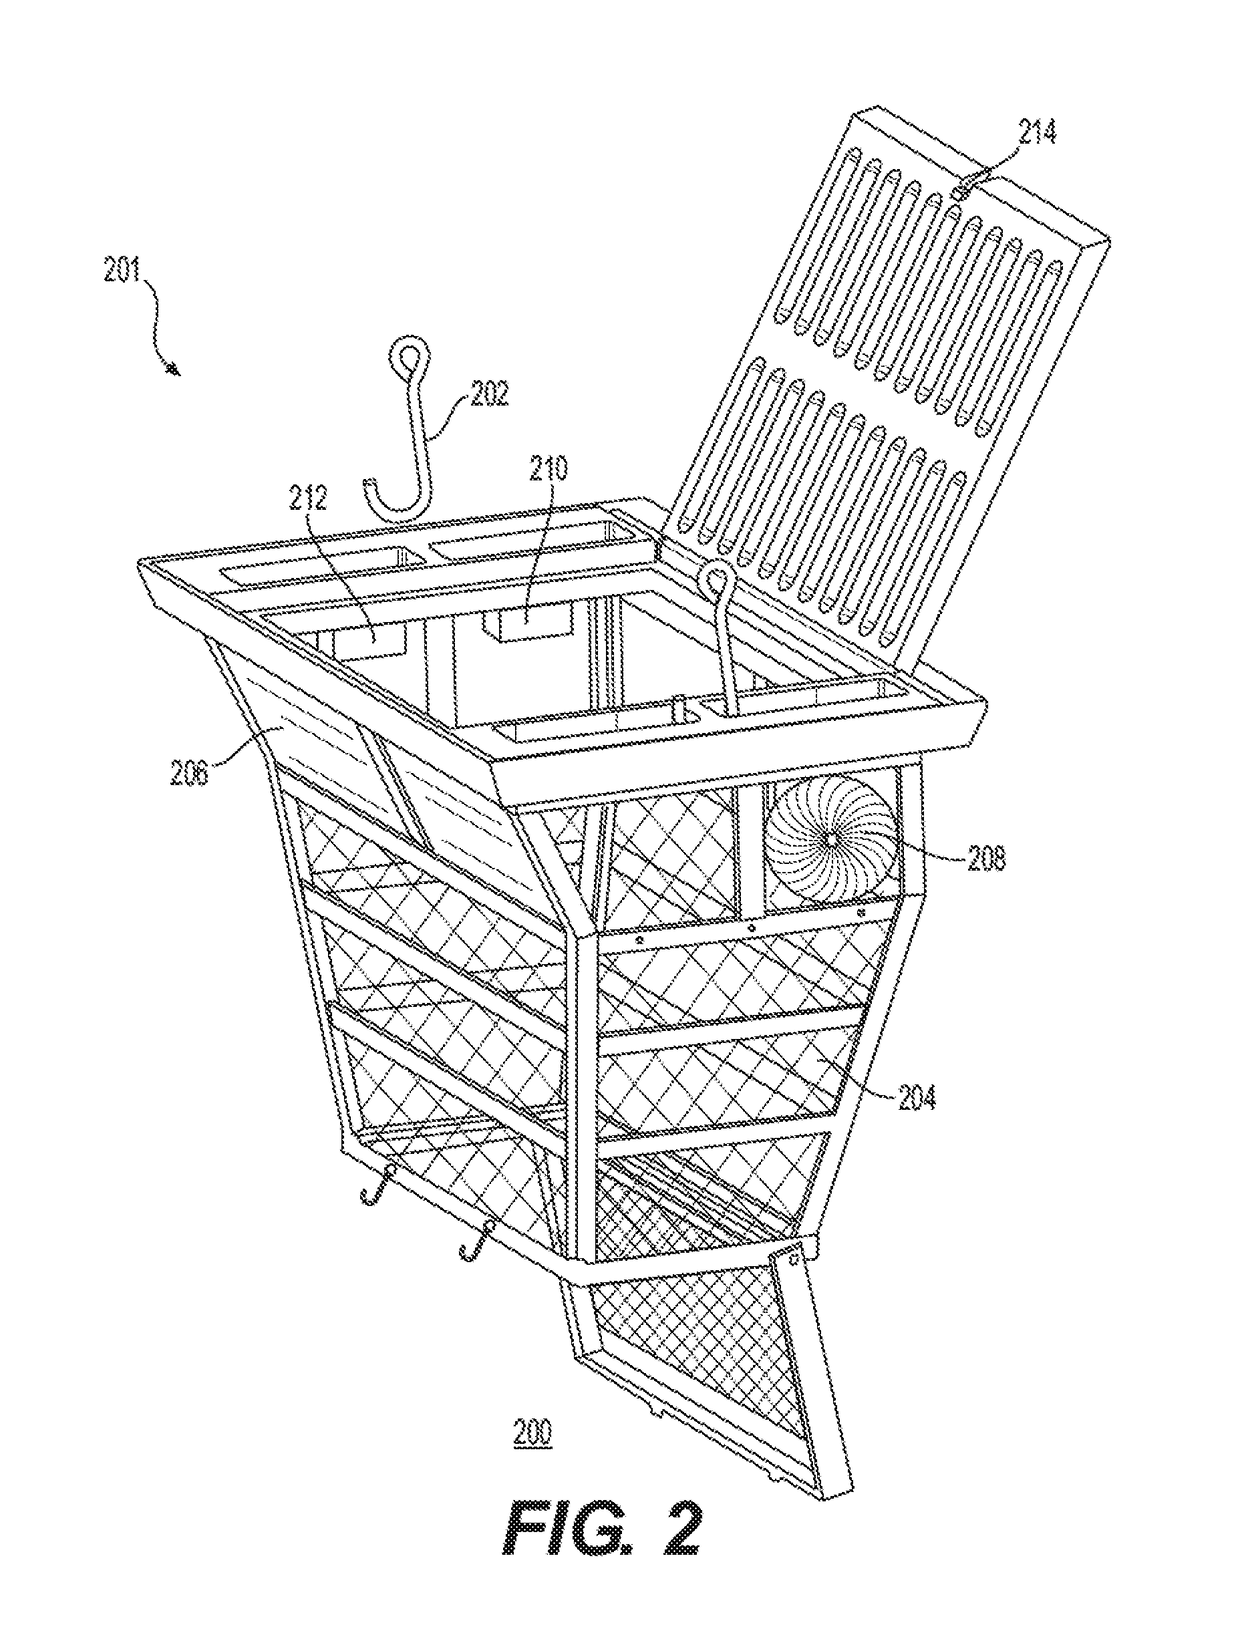 Removable Catch Basin Filter Insert and Lifting Apparatus